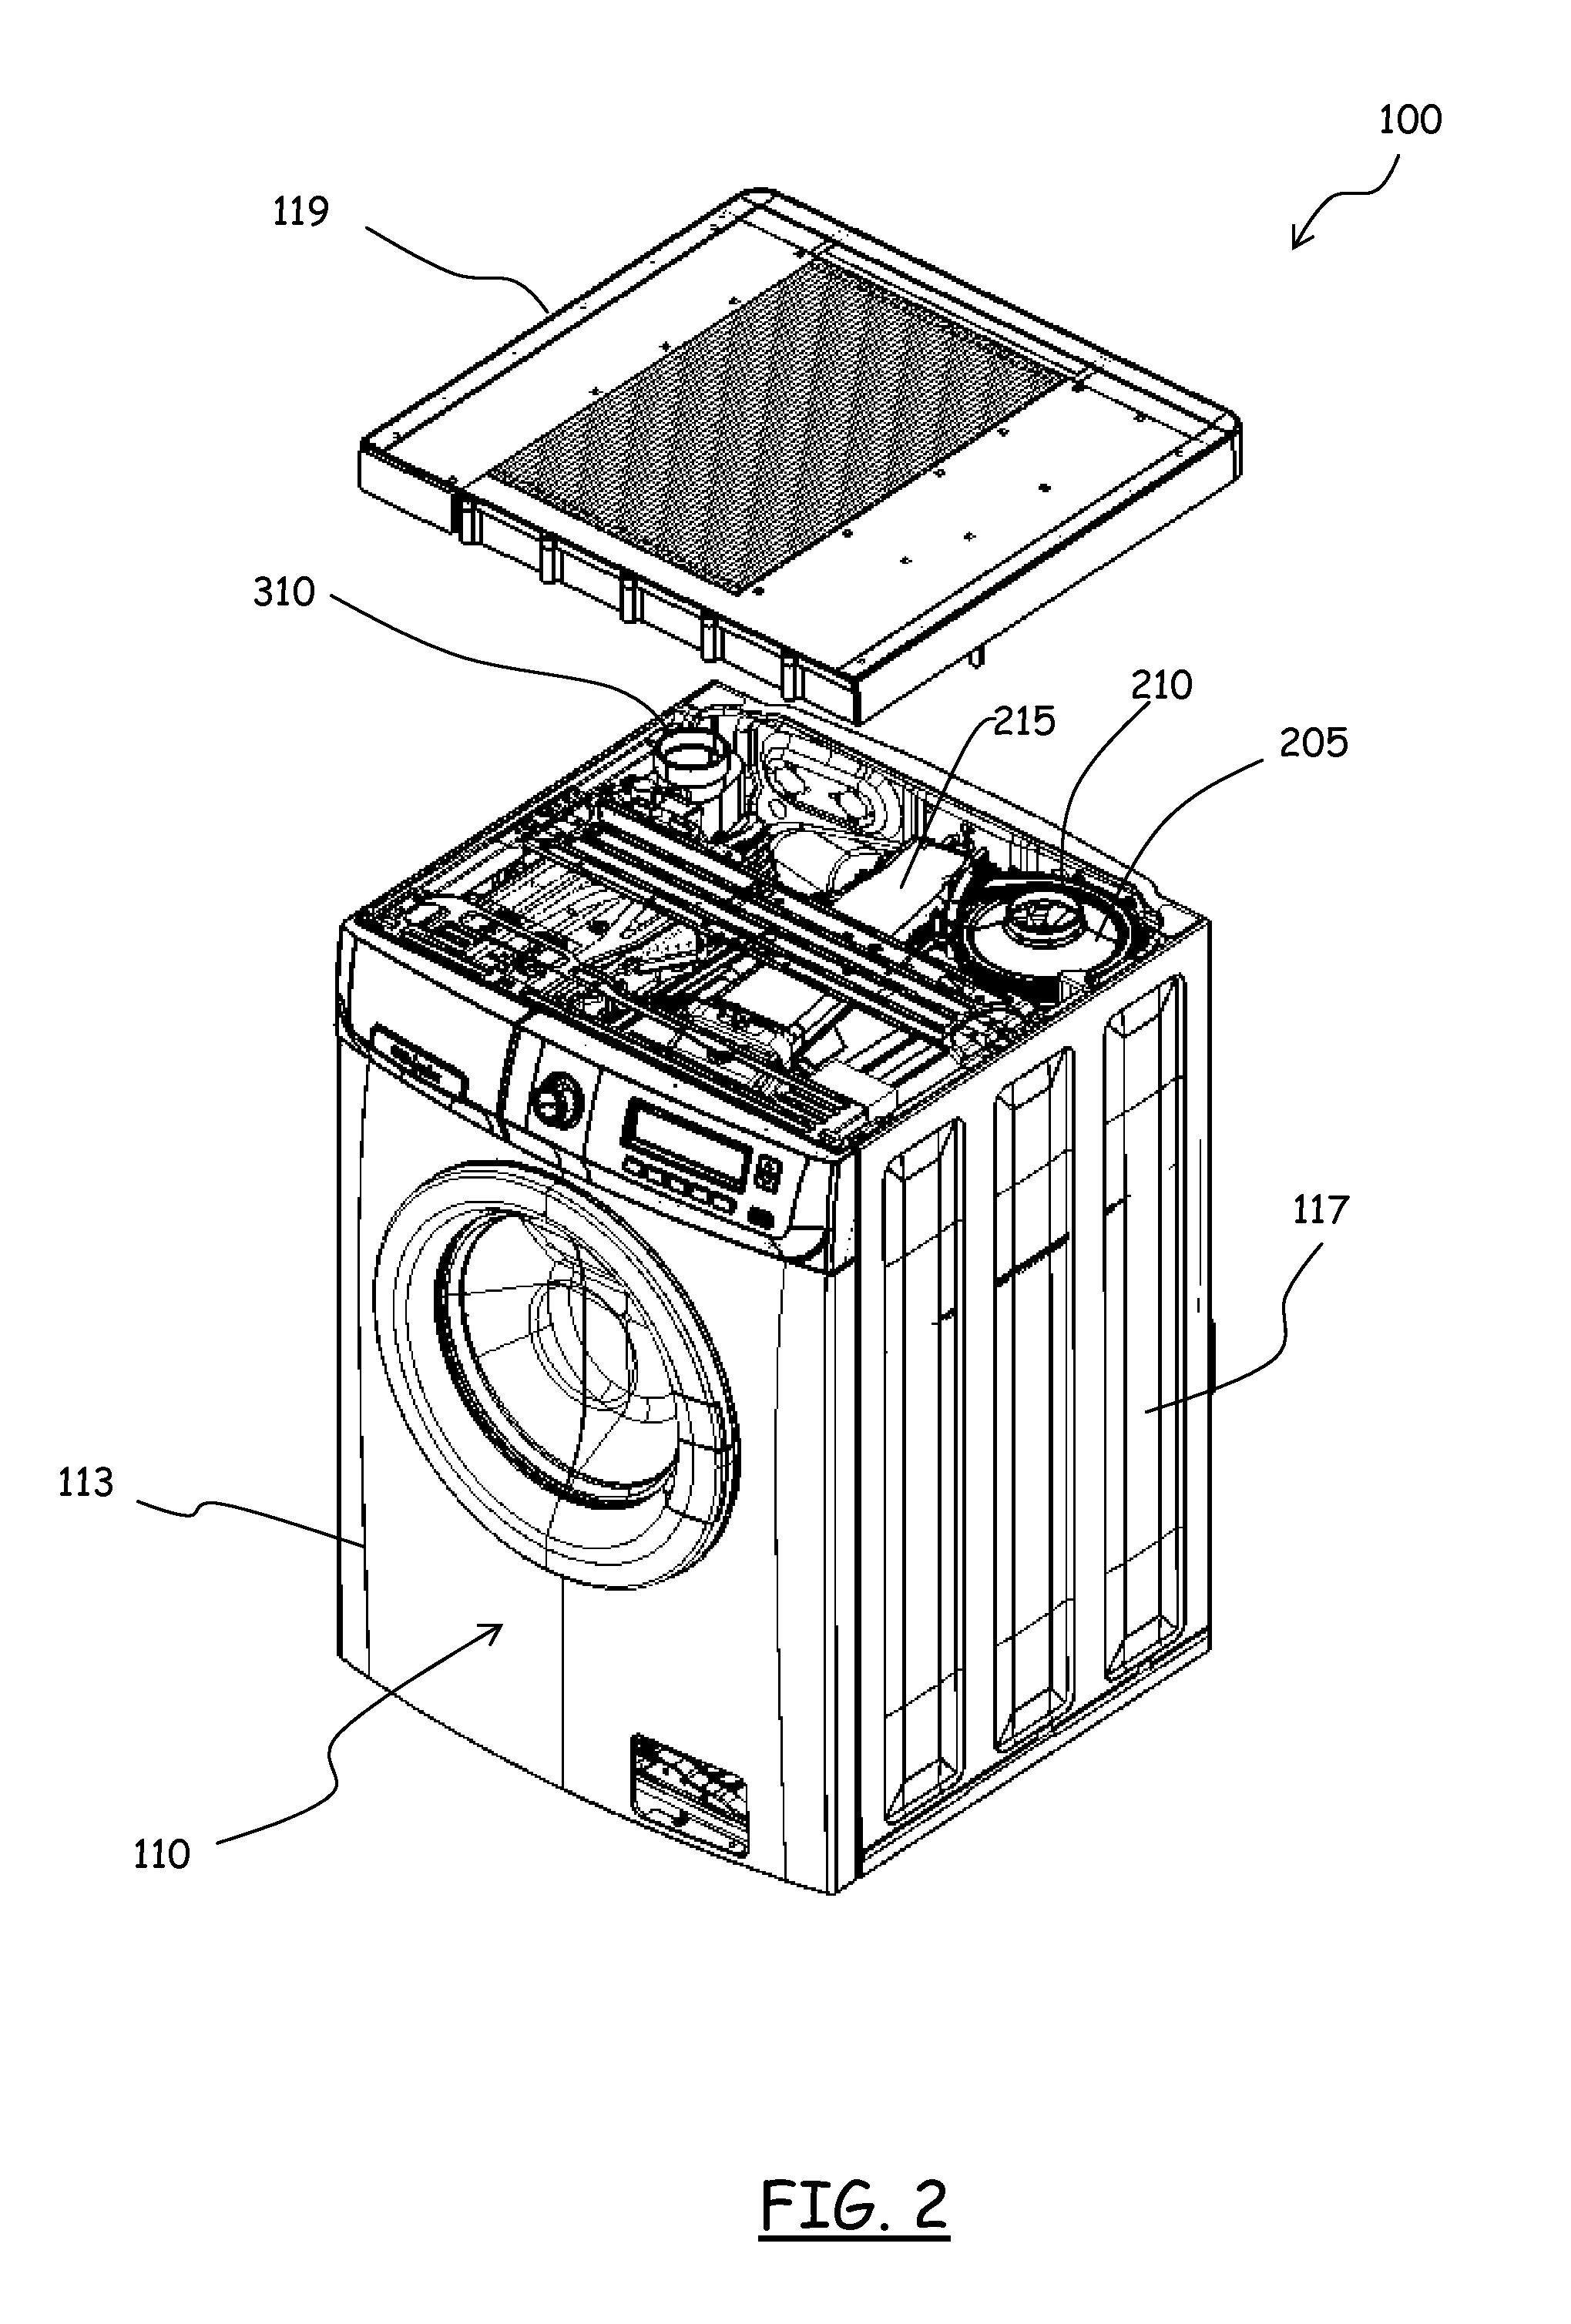 Appliance for drying laundry